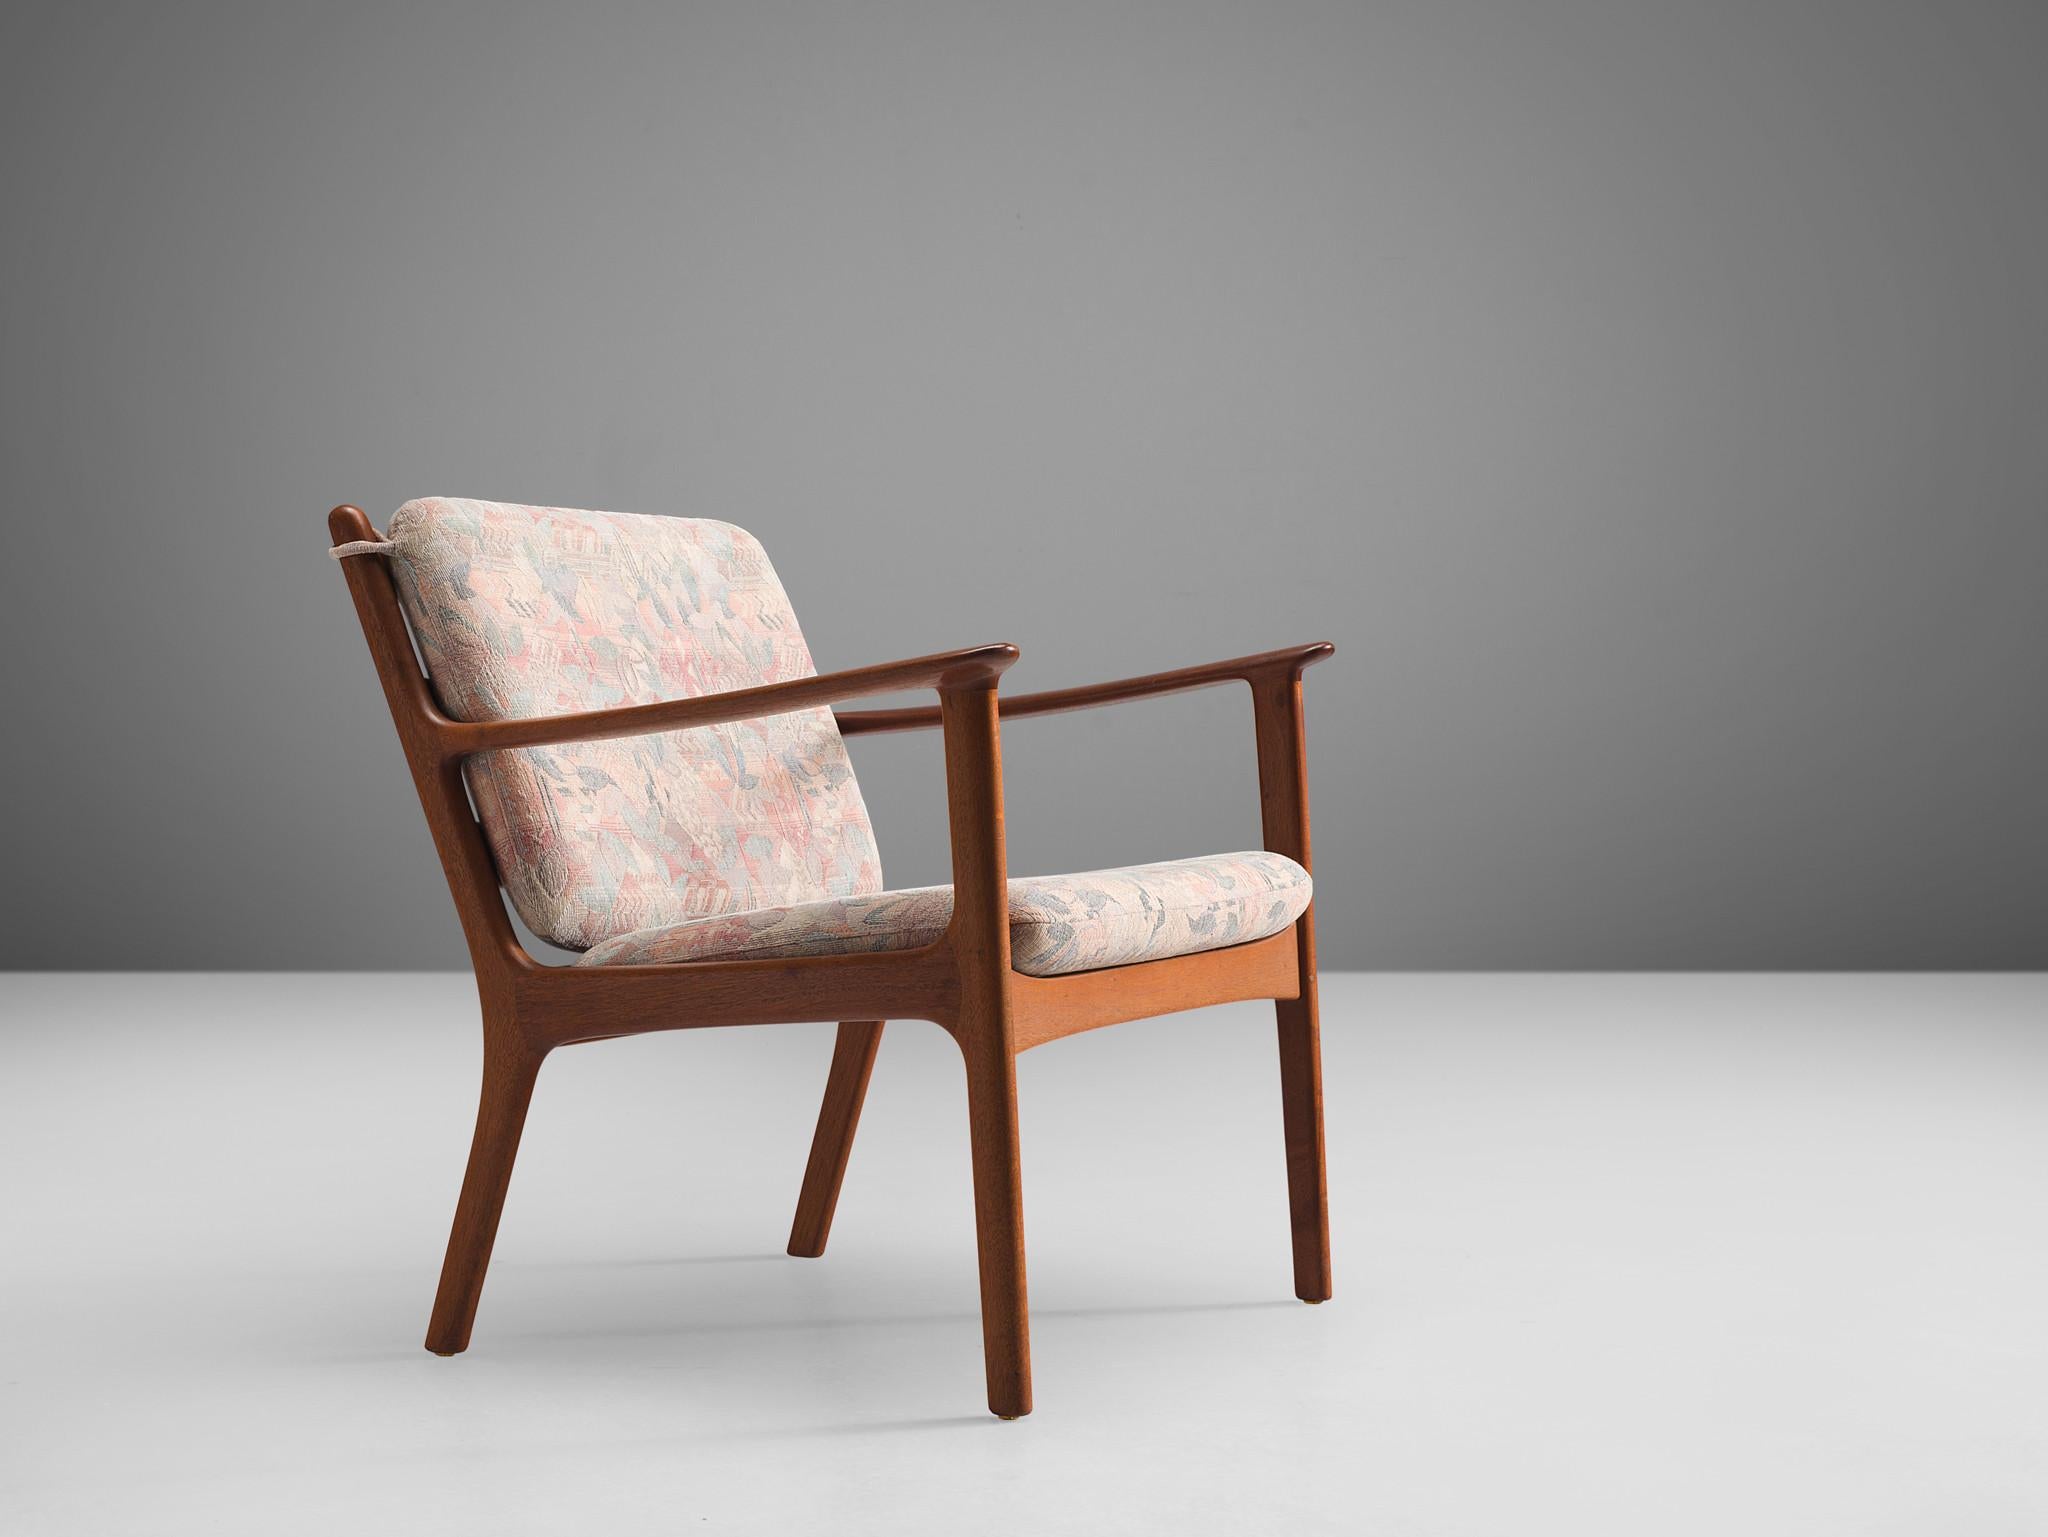 Ole Wanscher, chair, model 'PJ 112' mahogany, pink patterned fabric, Denmark, 1950s.

This delicate Danish chair is designed by Ole Wanscher. The frame shows elegant lines, especially in the armrests. The sofa is executed with tilted back, by means